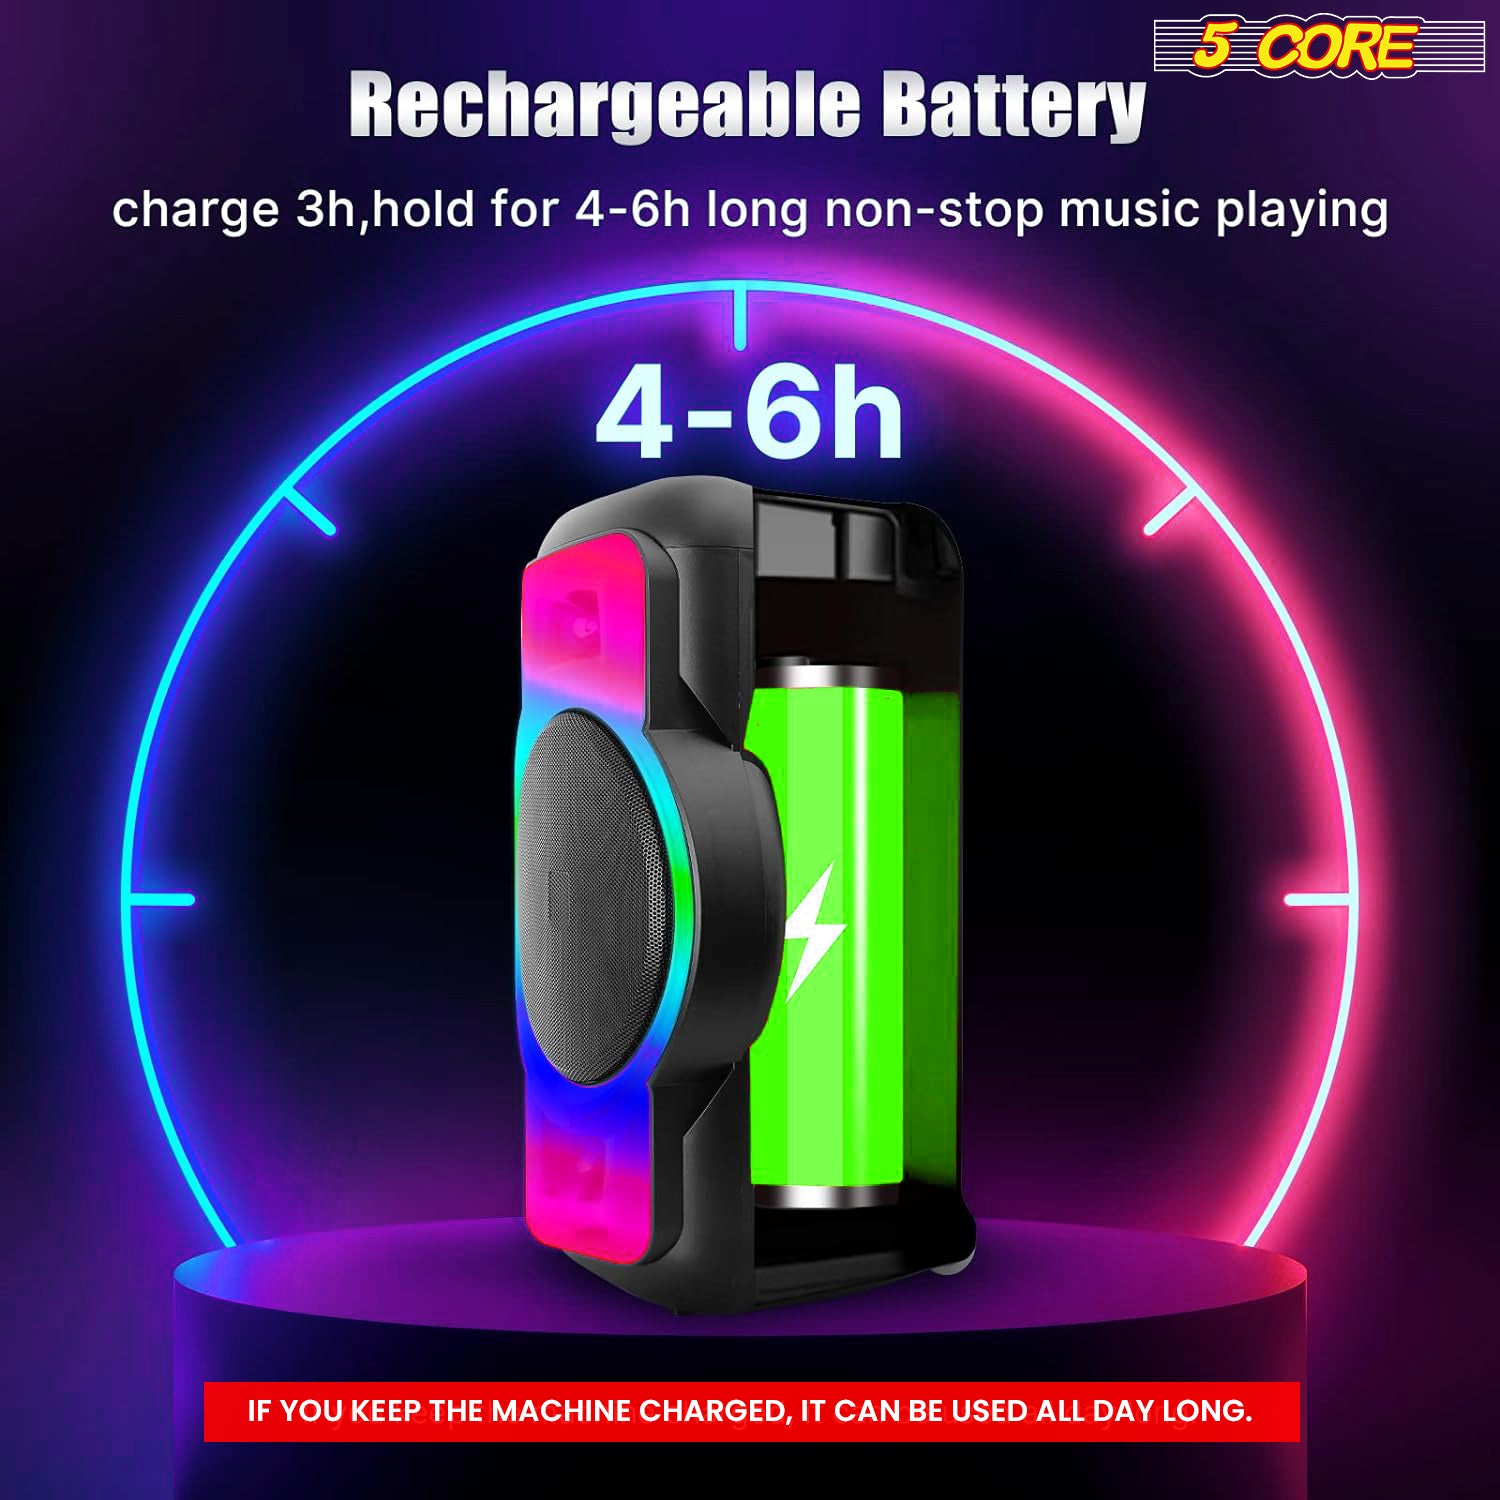 Rechargeable battery offers 4-6 hours of non-stop music at maximum volume.